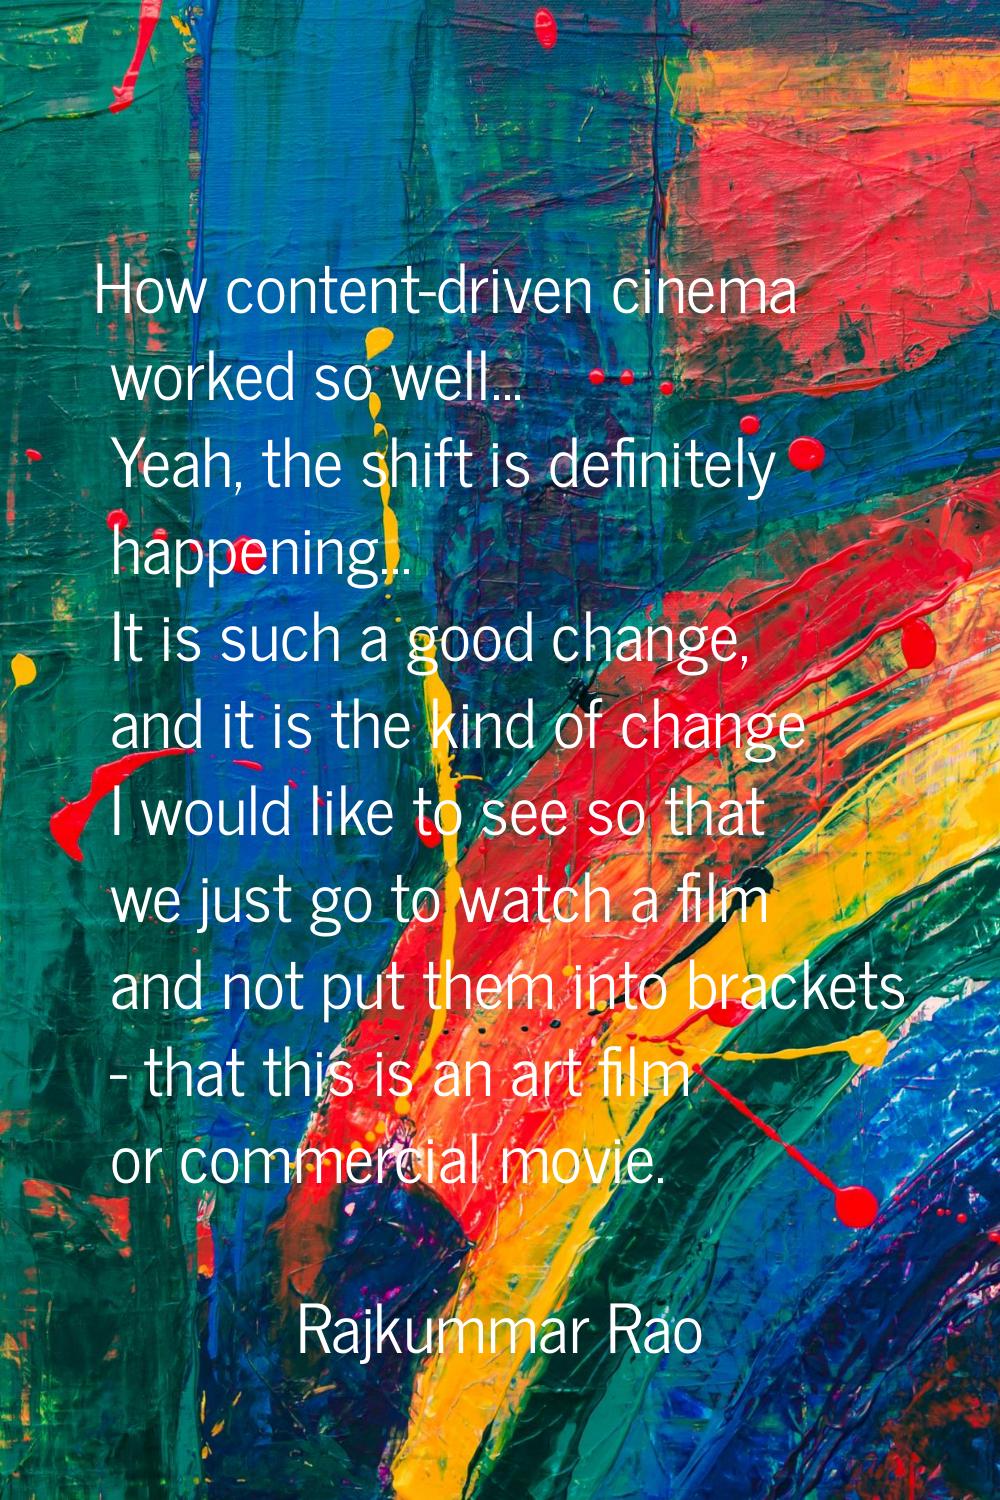 How content-driven cinema worked so well... Yeah, the shift is definitely happening... It is such a